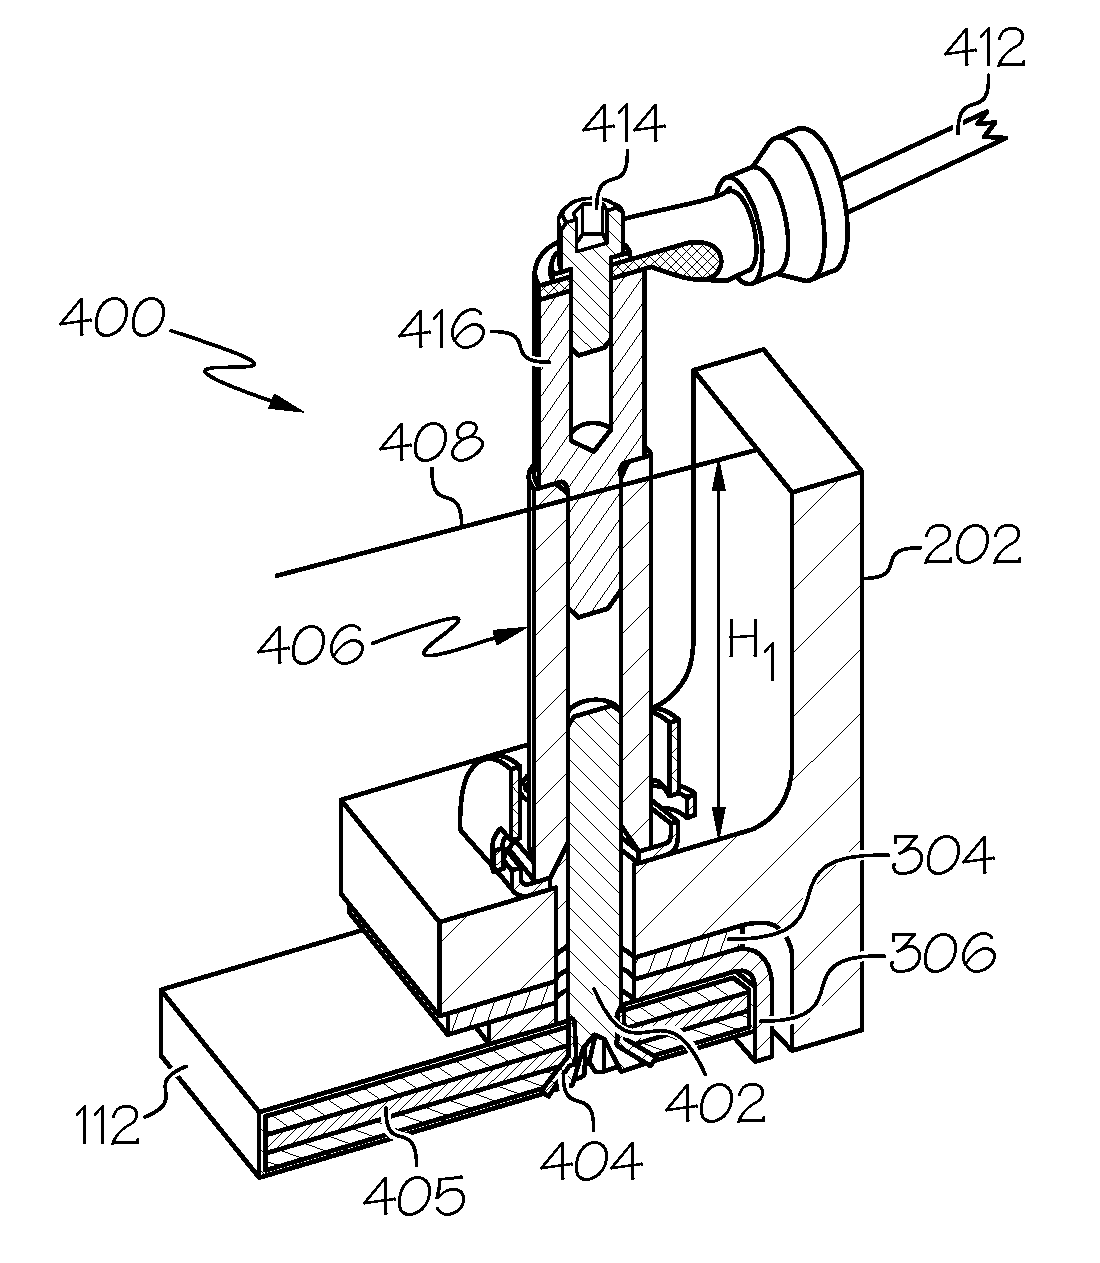 Device for electrically grounding aircraft components mounted on a composite skin fuselage